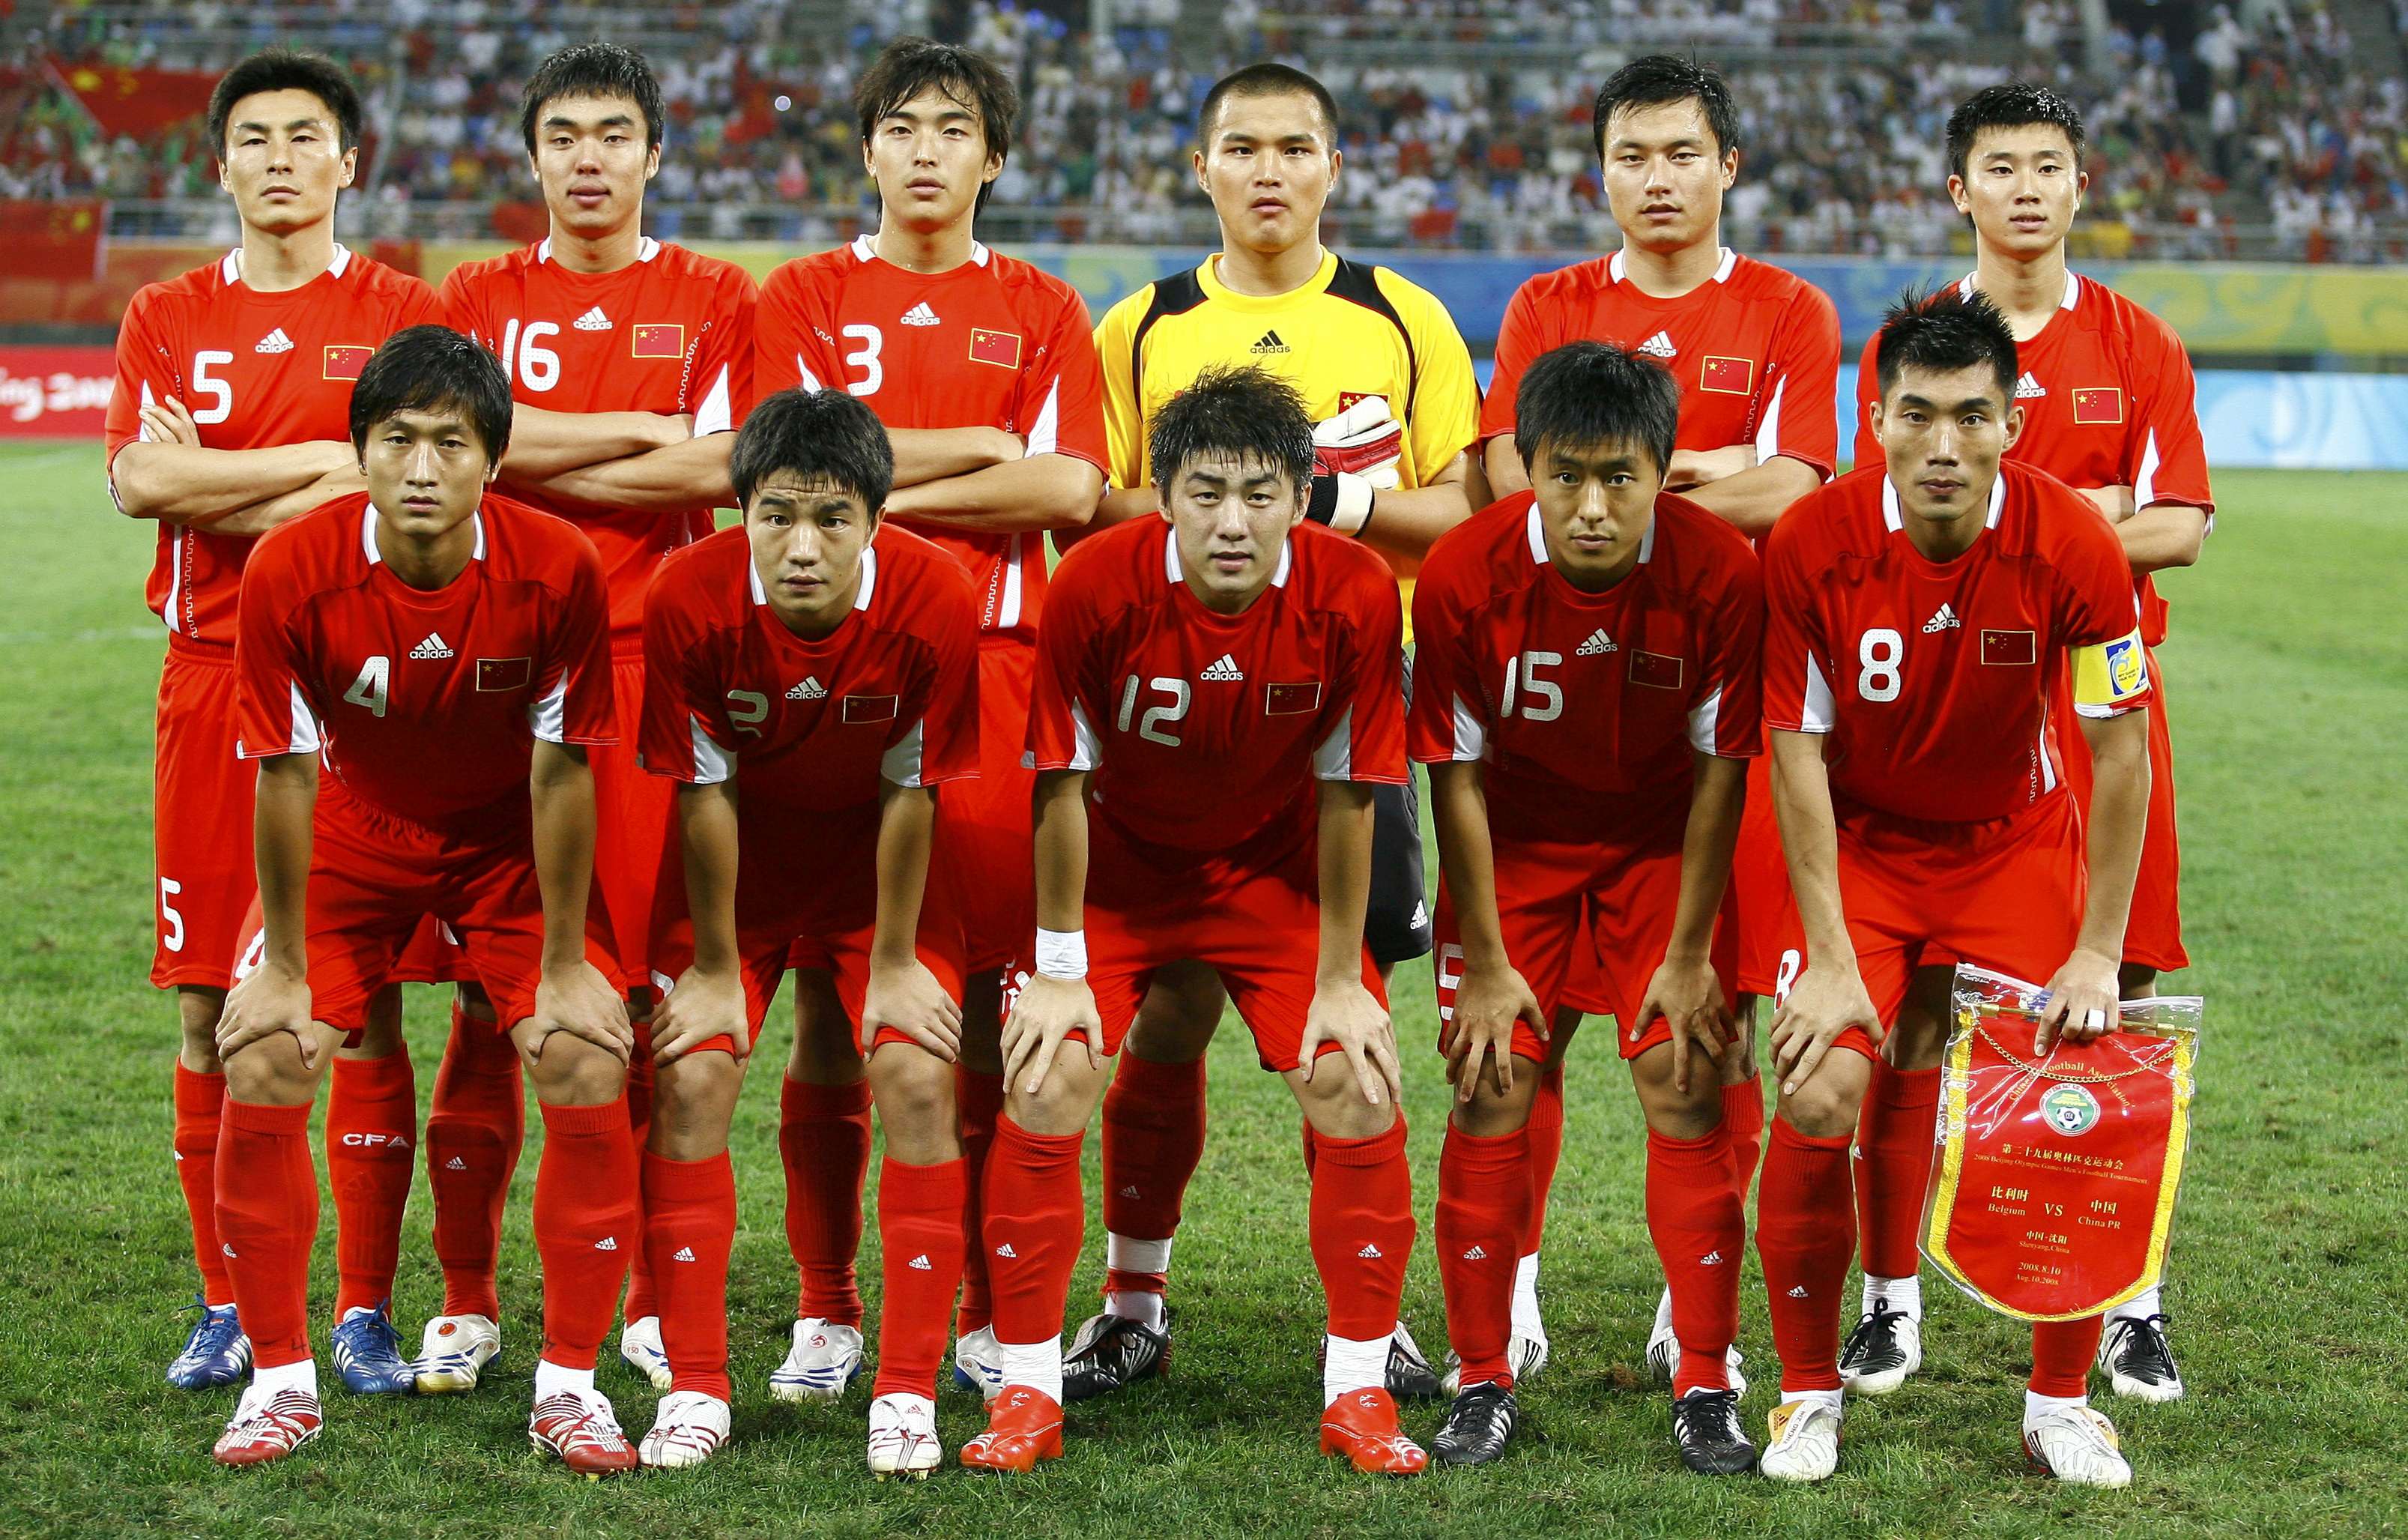 Members of the Chinese team pose before their men's first round Group C soccer match against Belgium at the Beijing 2008 Olympic Games